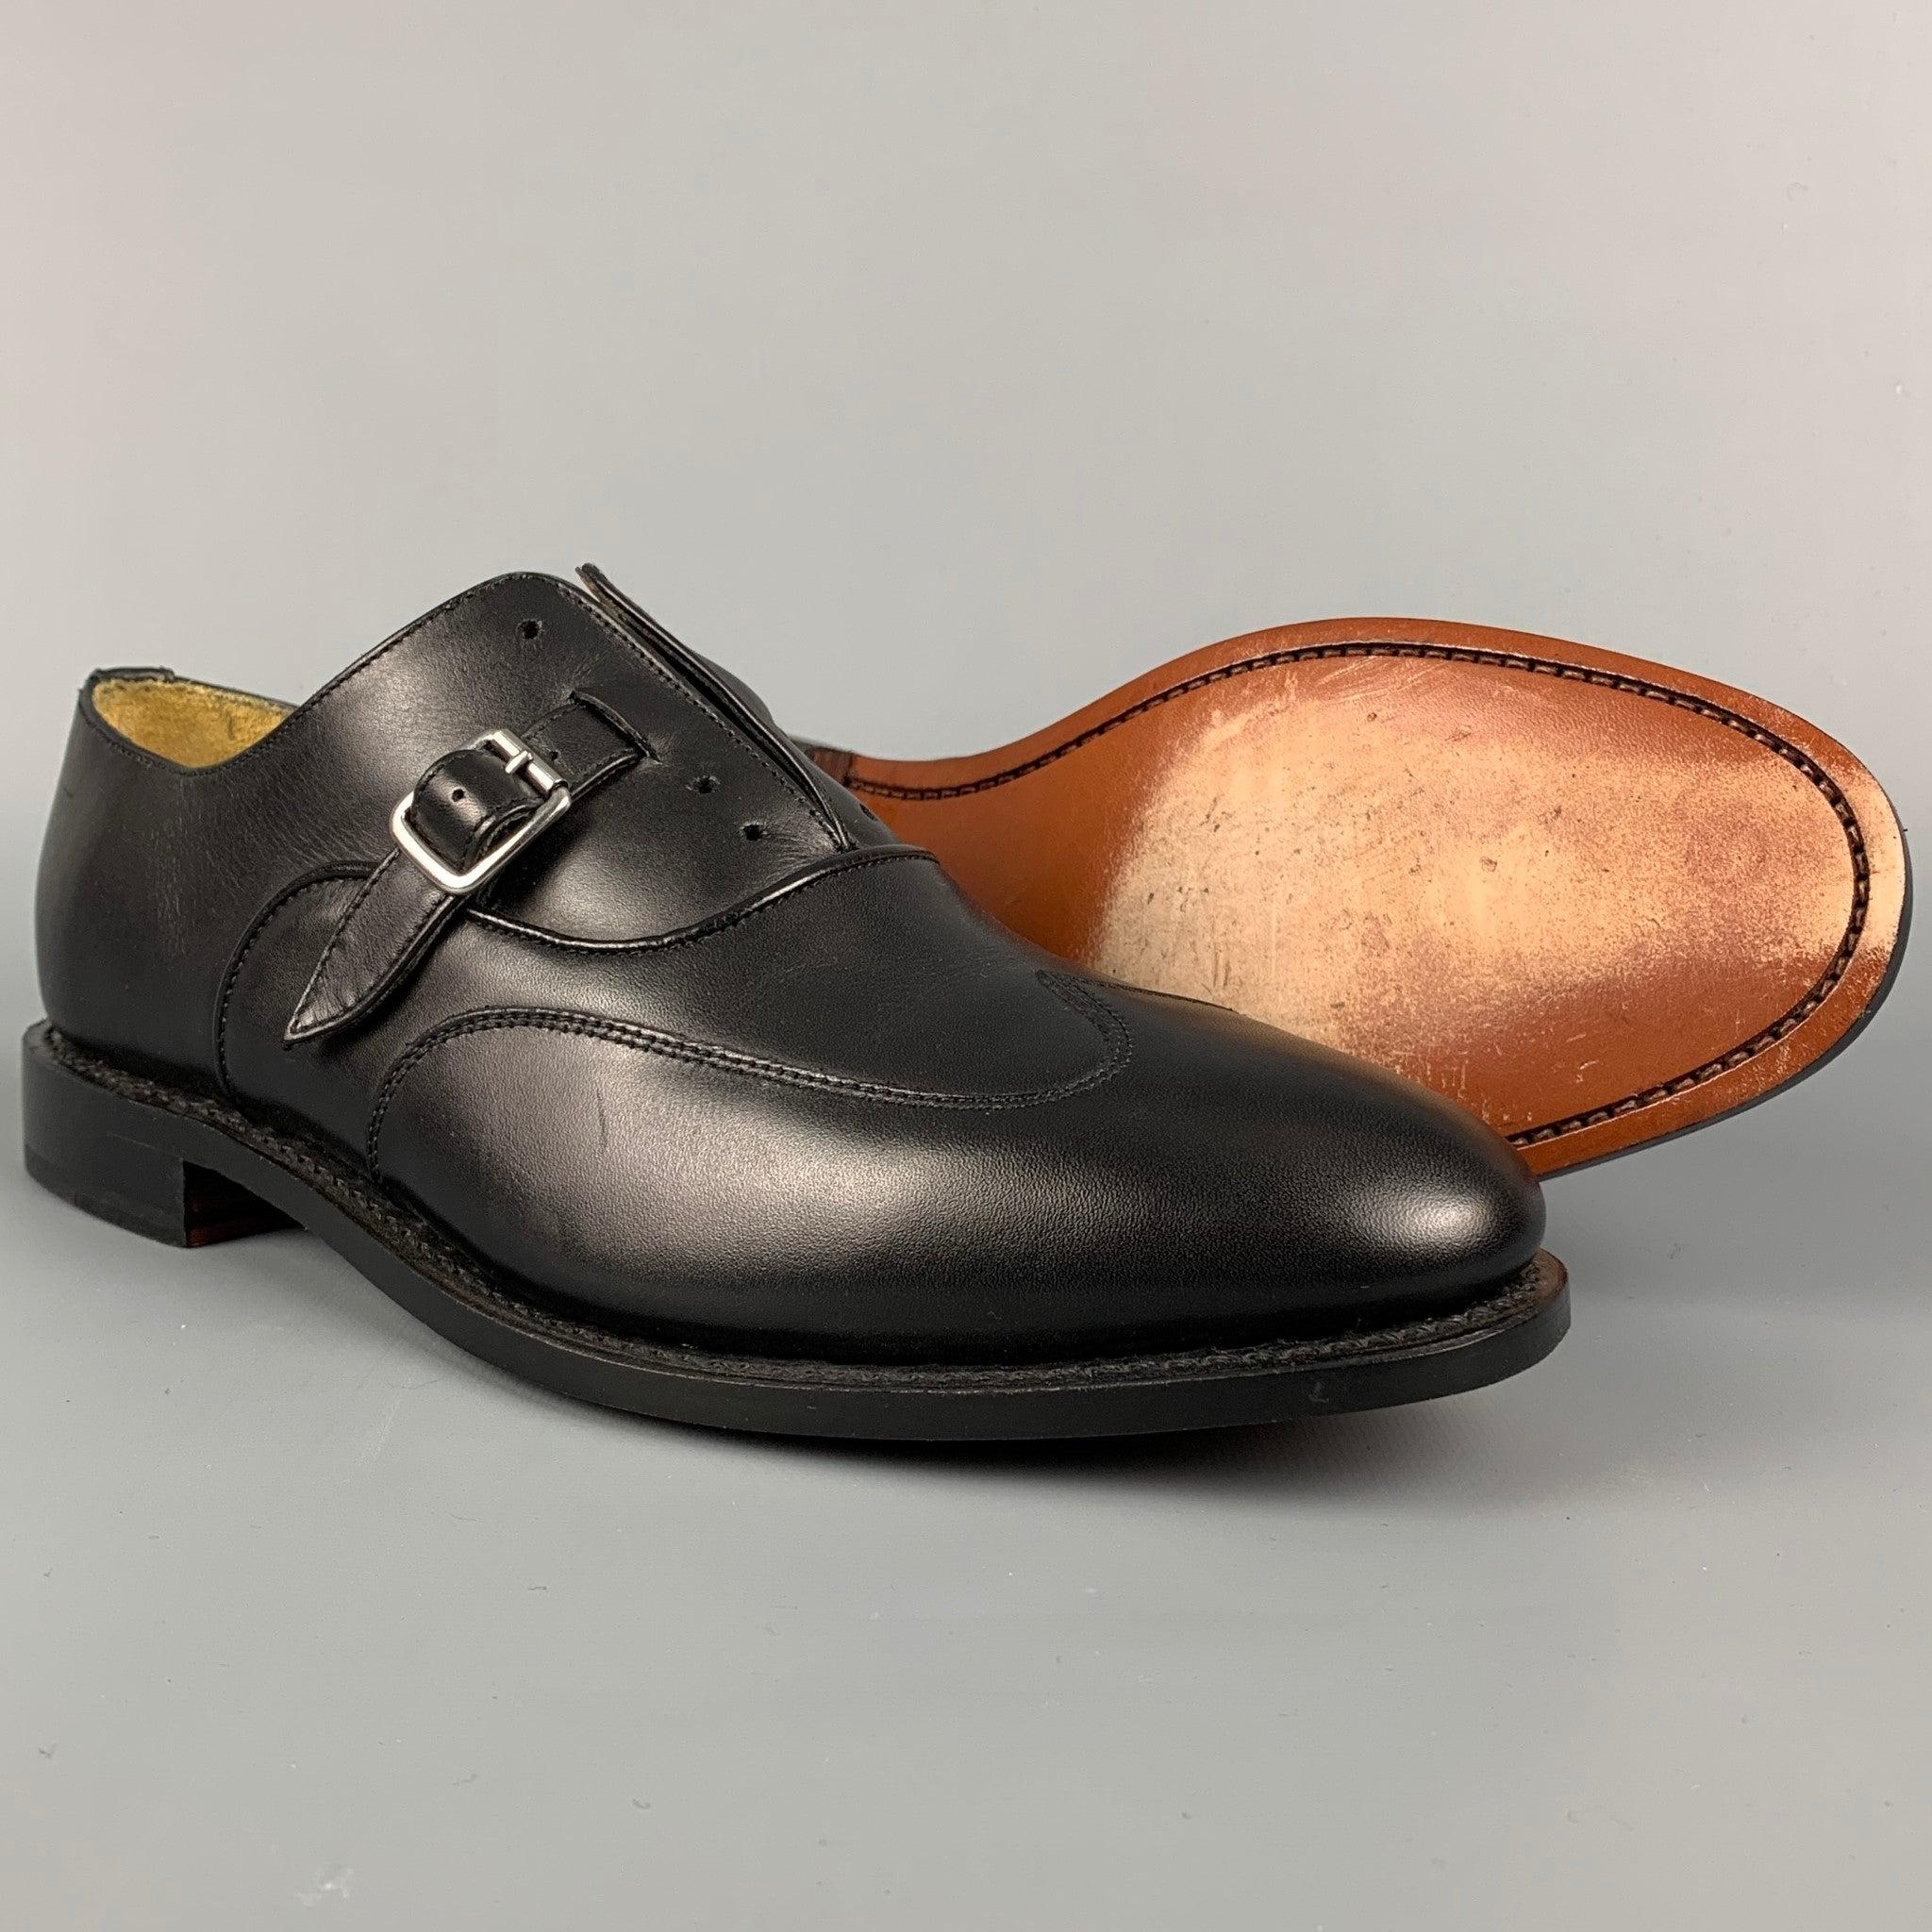 MICHAEL BASTIAN Size 8.5 Black Leather Monk Strap Lace Up Shoes In Good Condition For Sale In San Francisco, CA